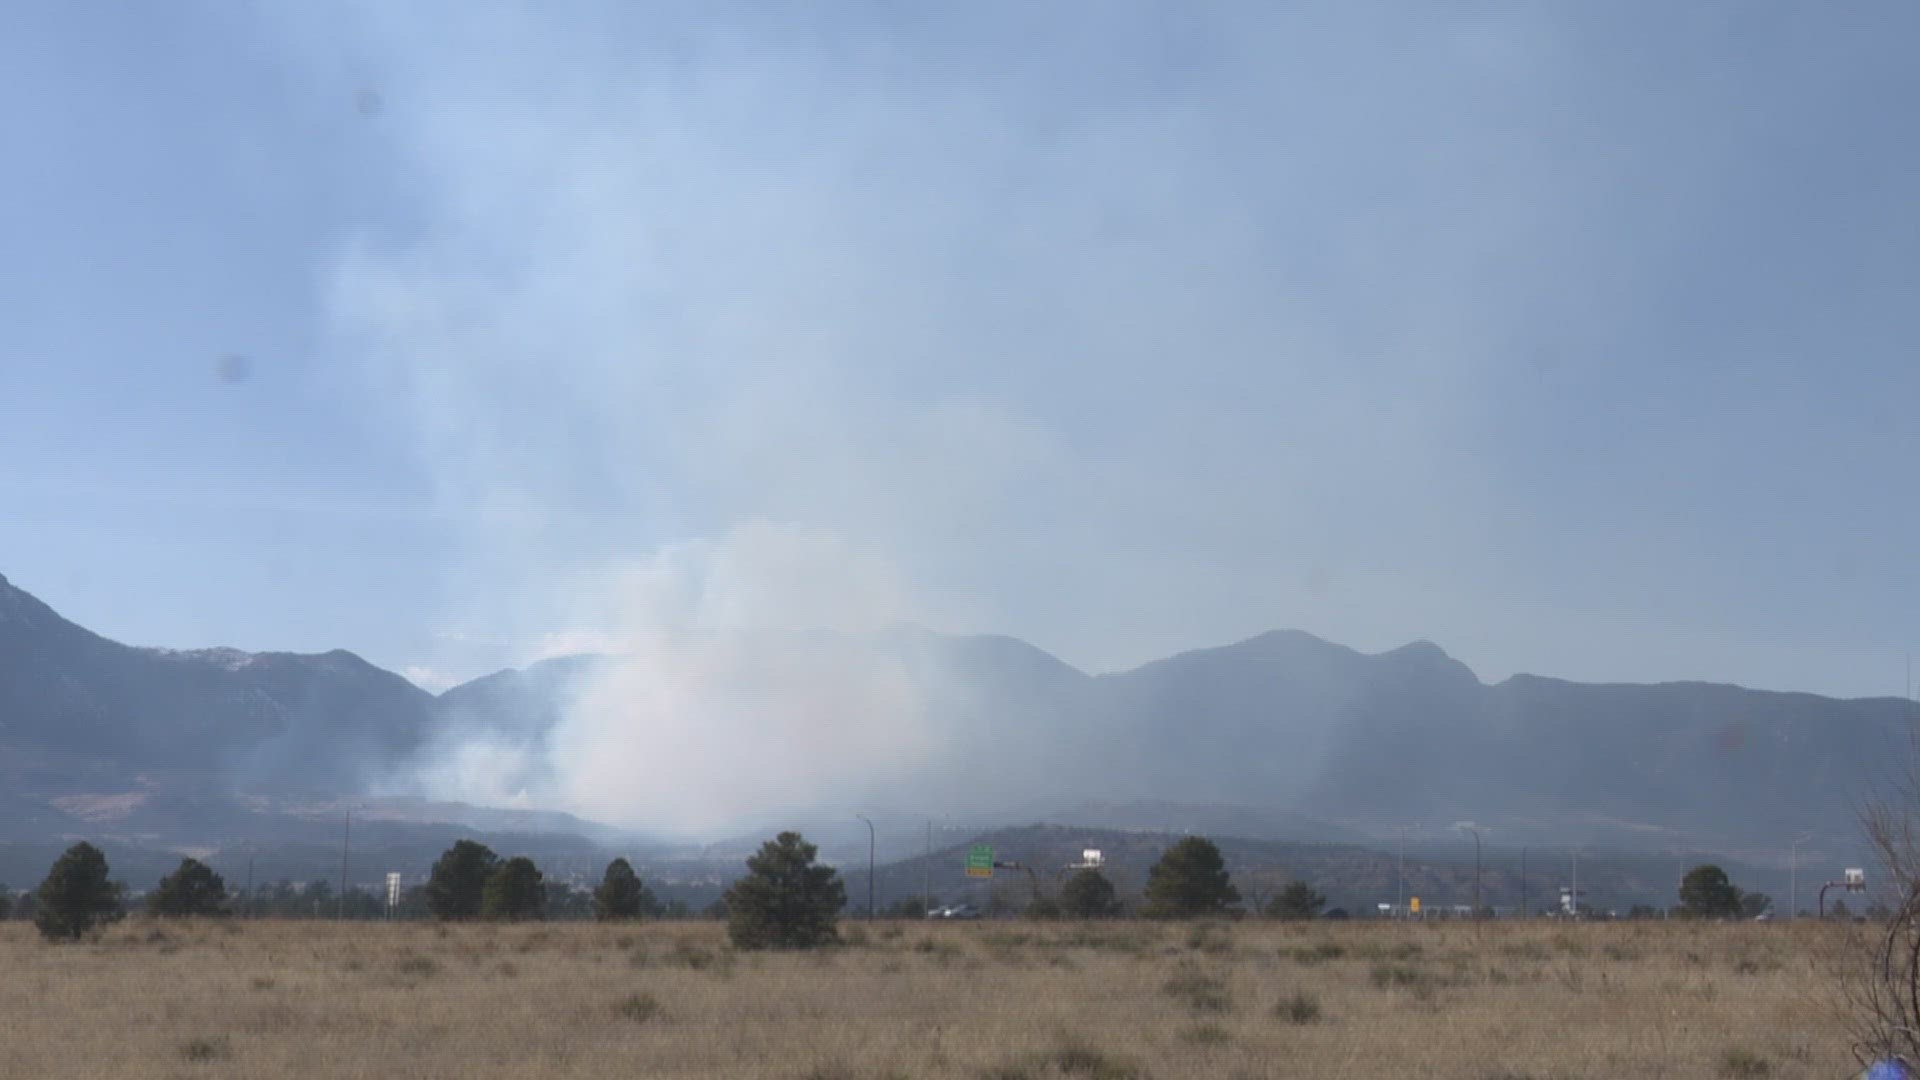 Whipping winds fueled fires up and down the state Sunday, and Red Flag Warnings are in effect for the Front Range and eastern Colorado again Monday.